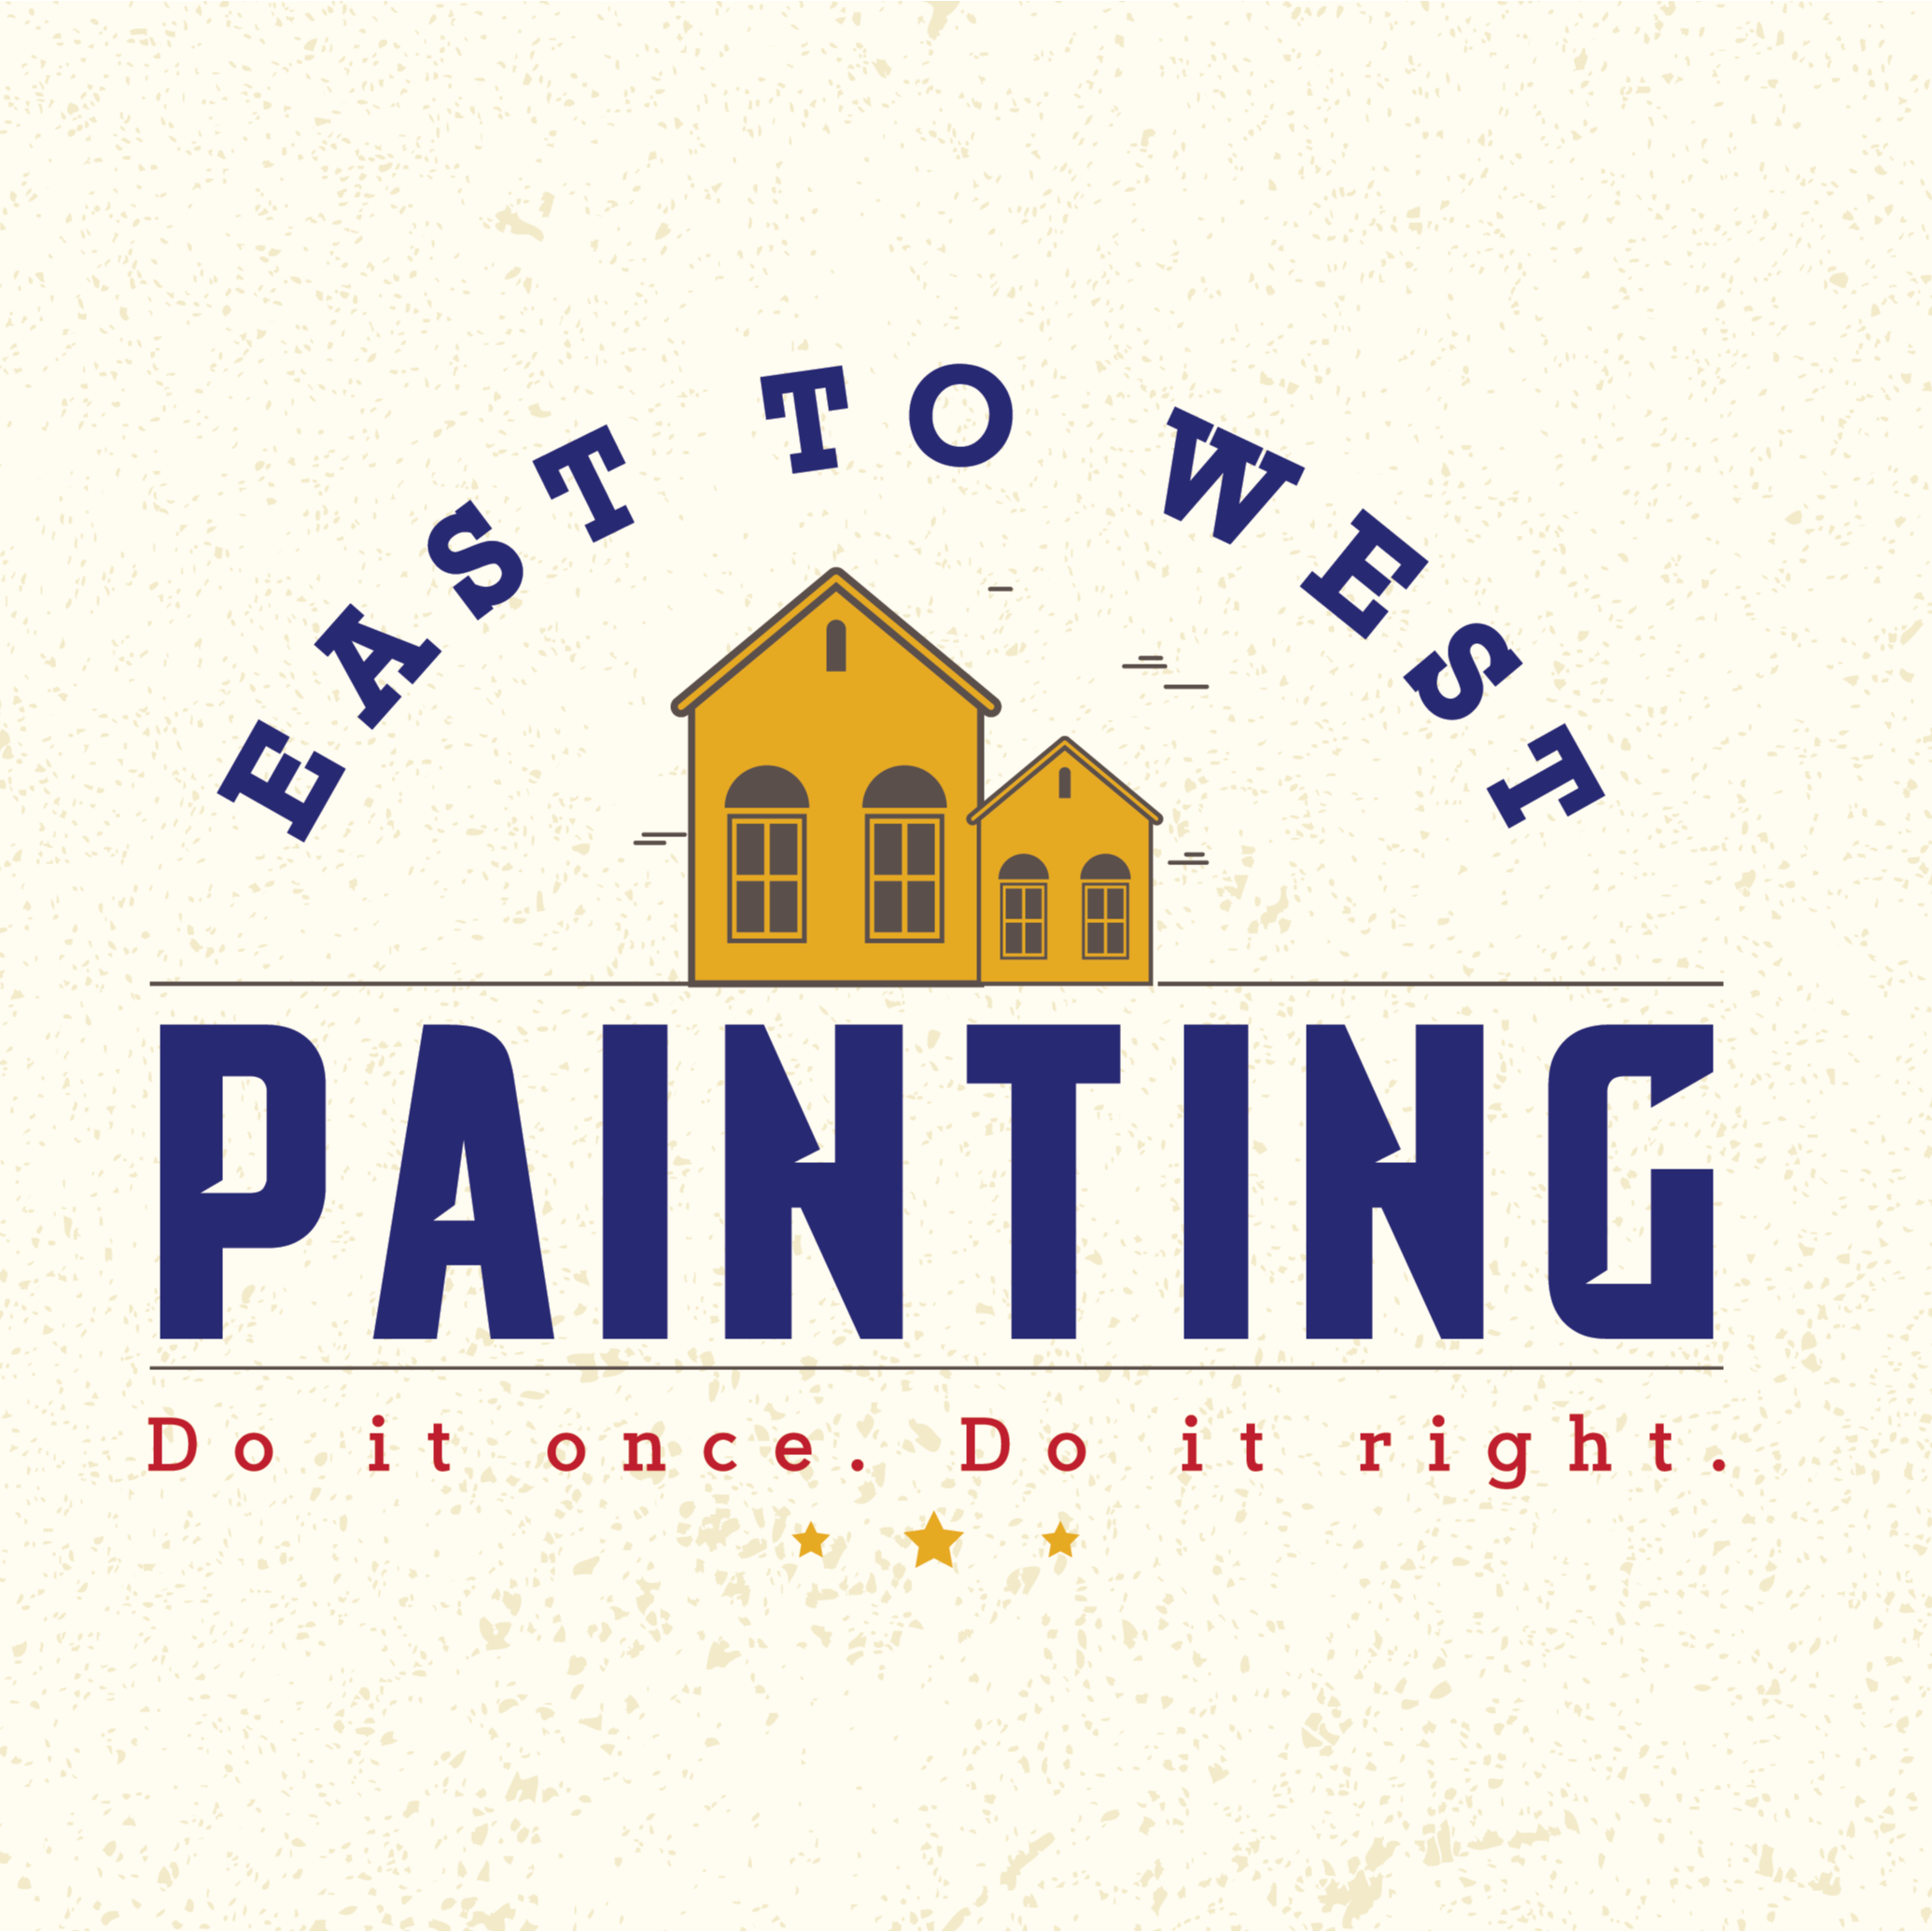 East to West Painting